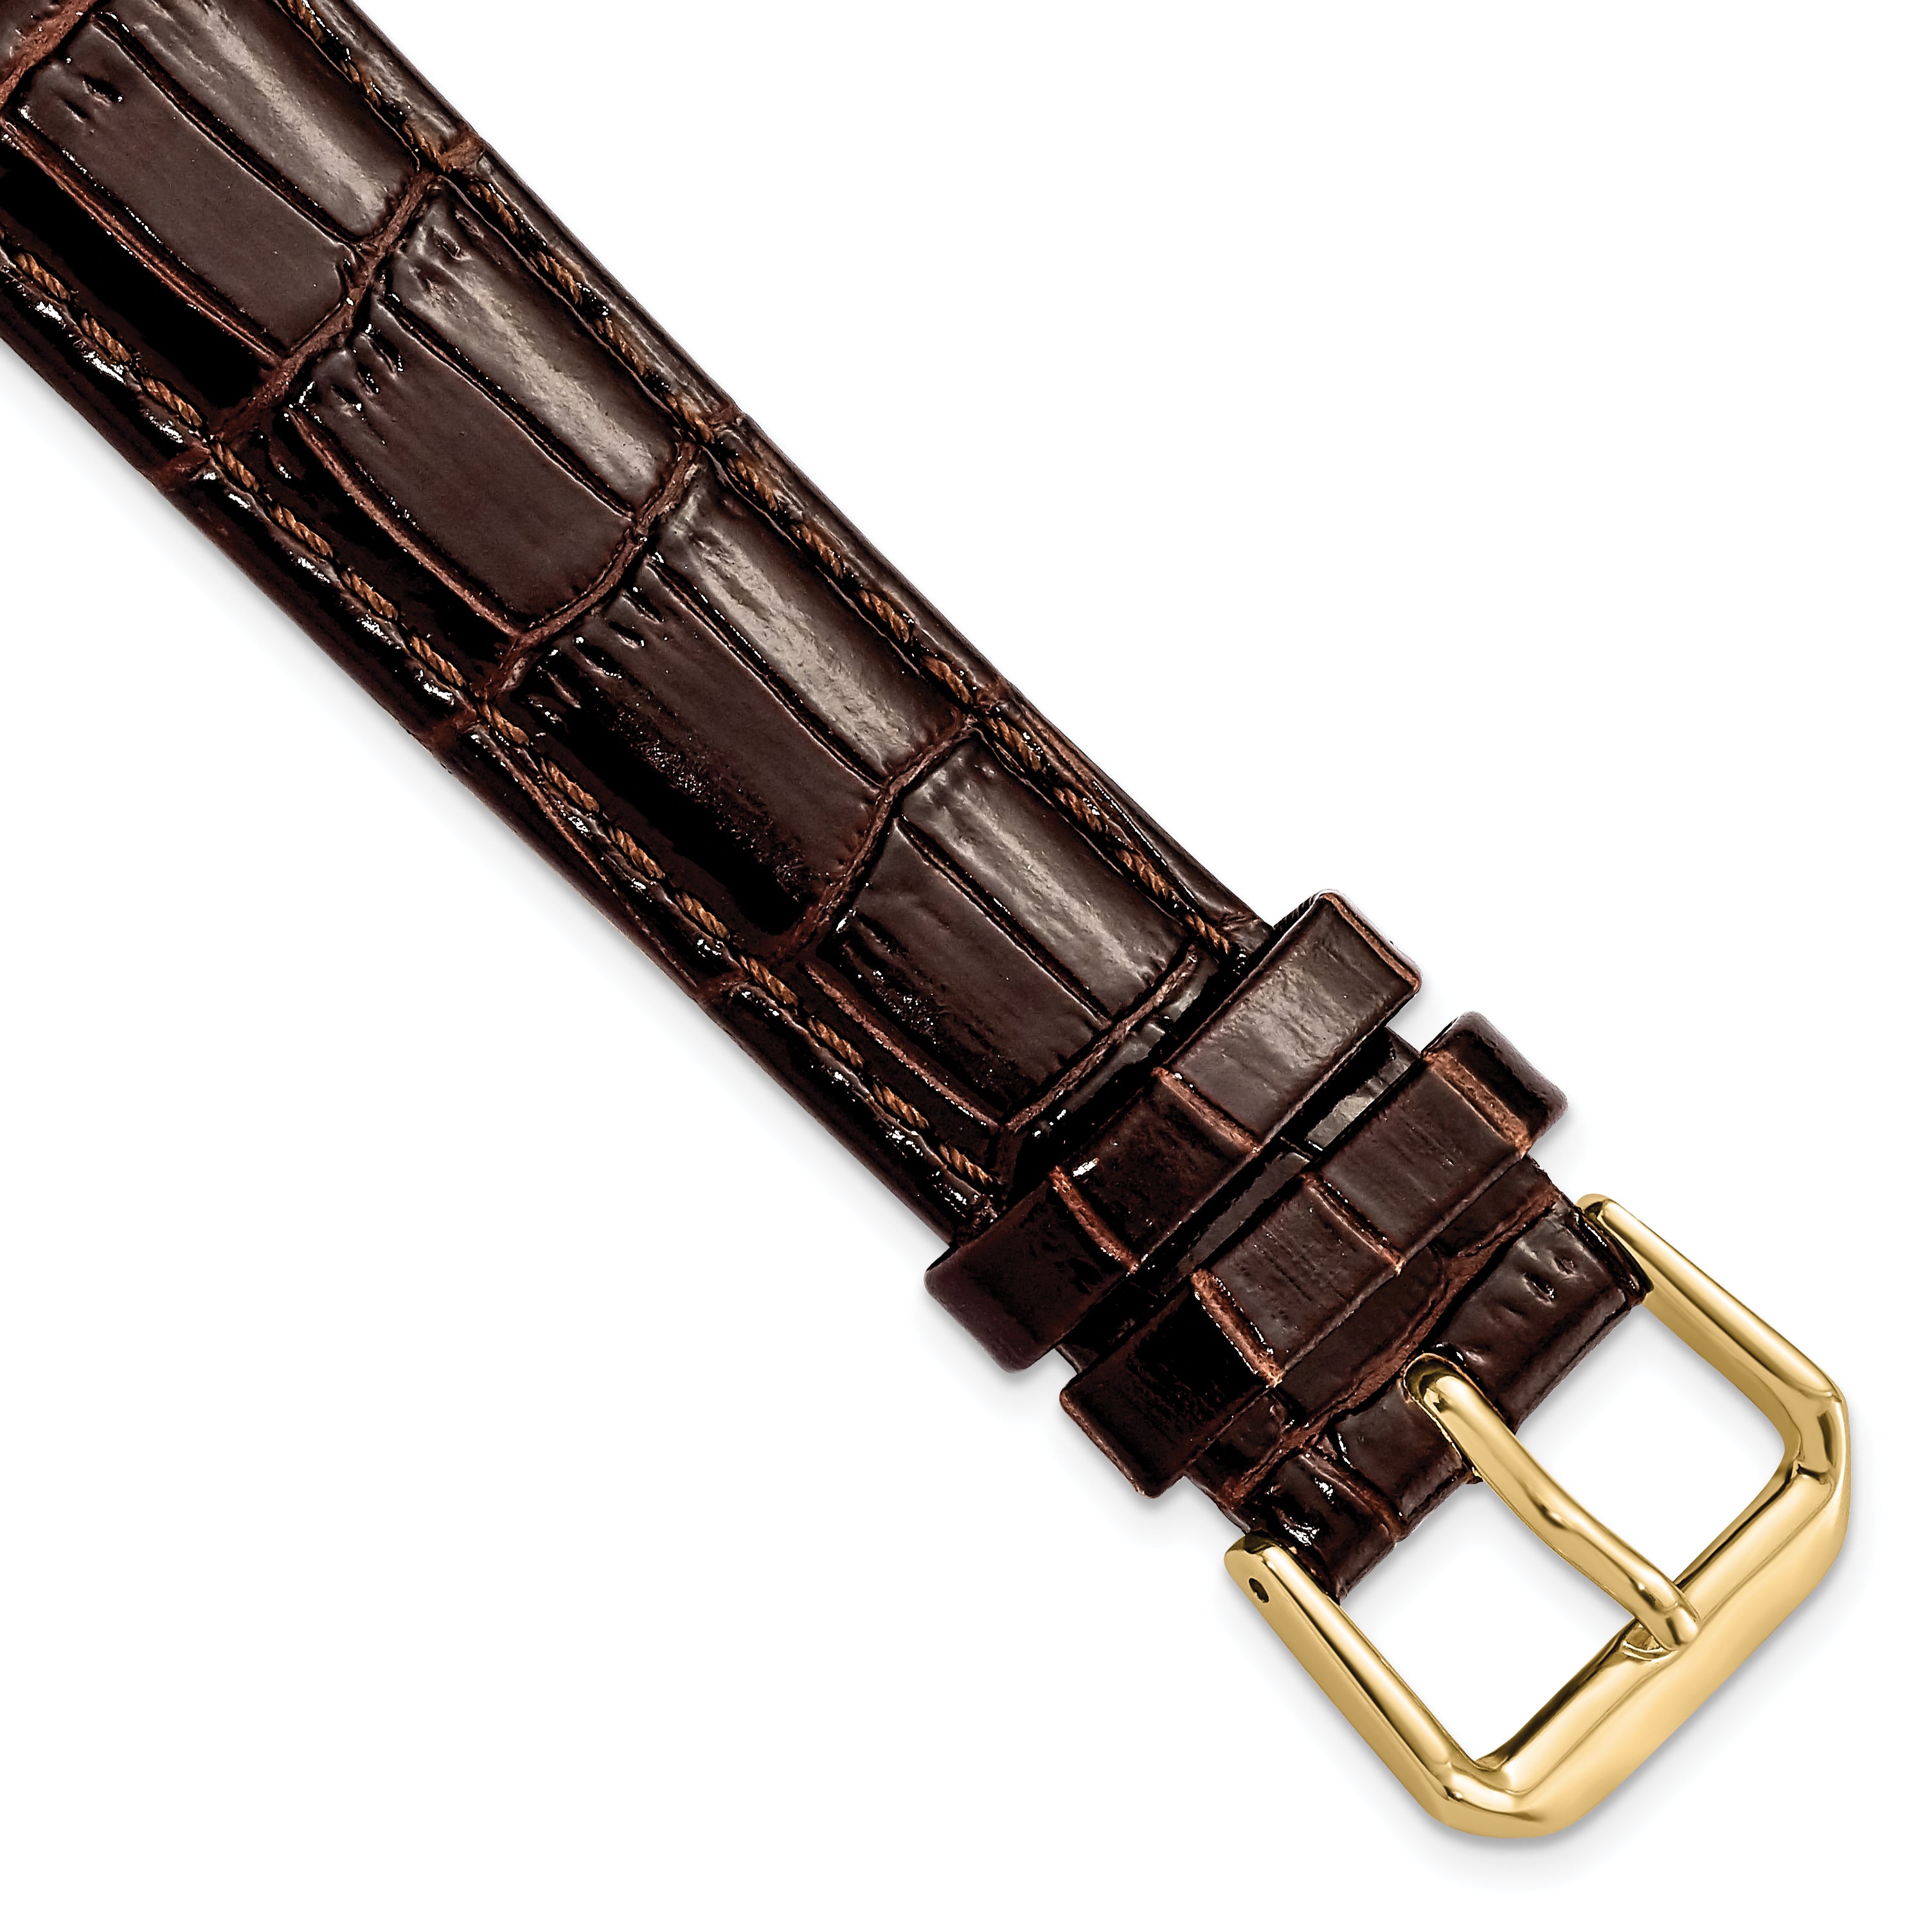 DeBeer 18mm Brown Crocodile Grain Leather with Dark Stitching and Gold-tone Buckle 7.5 inch Watch Band